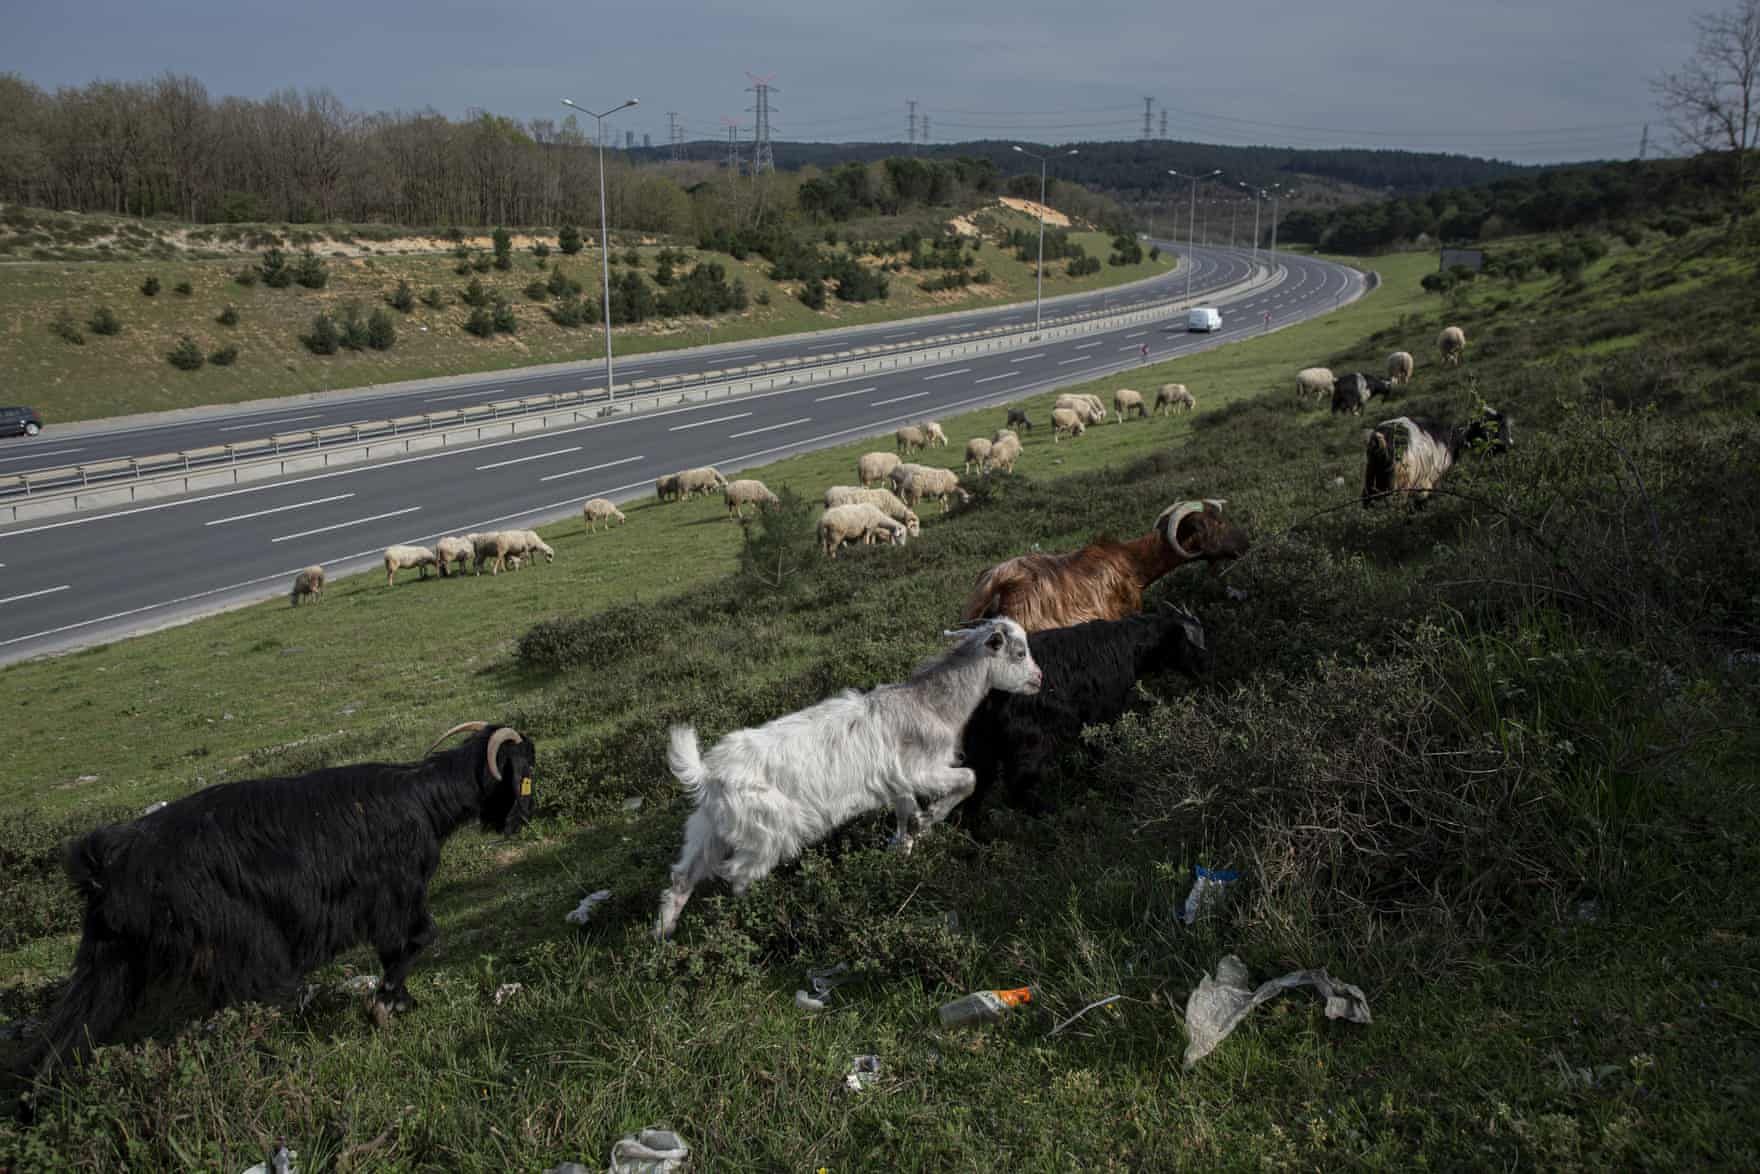 Sheeps and goats by highway